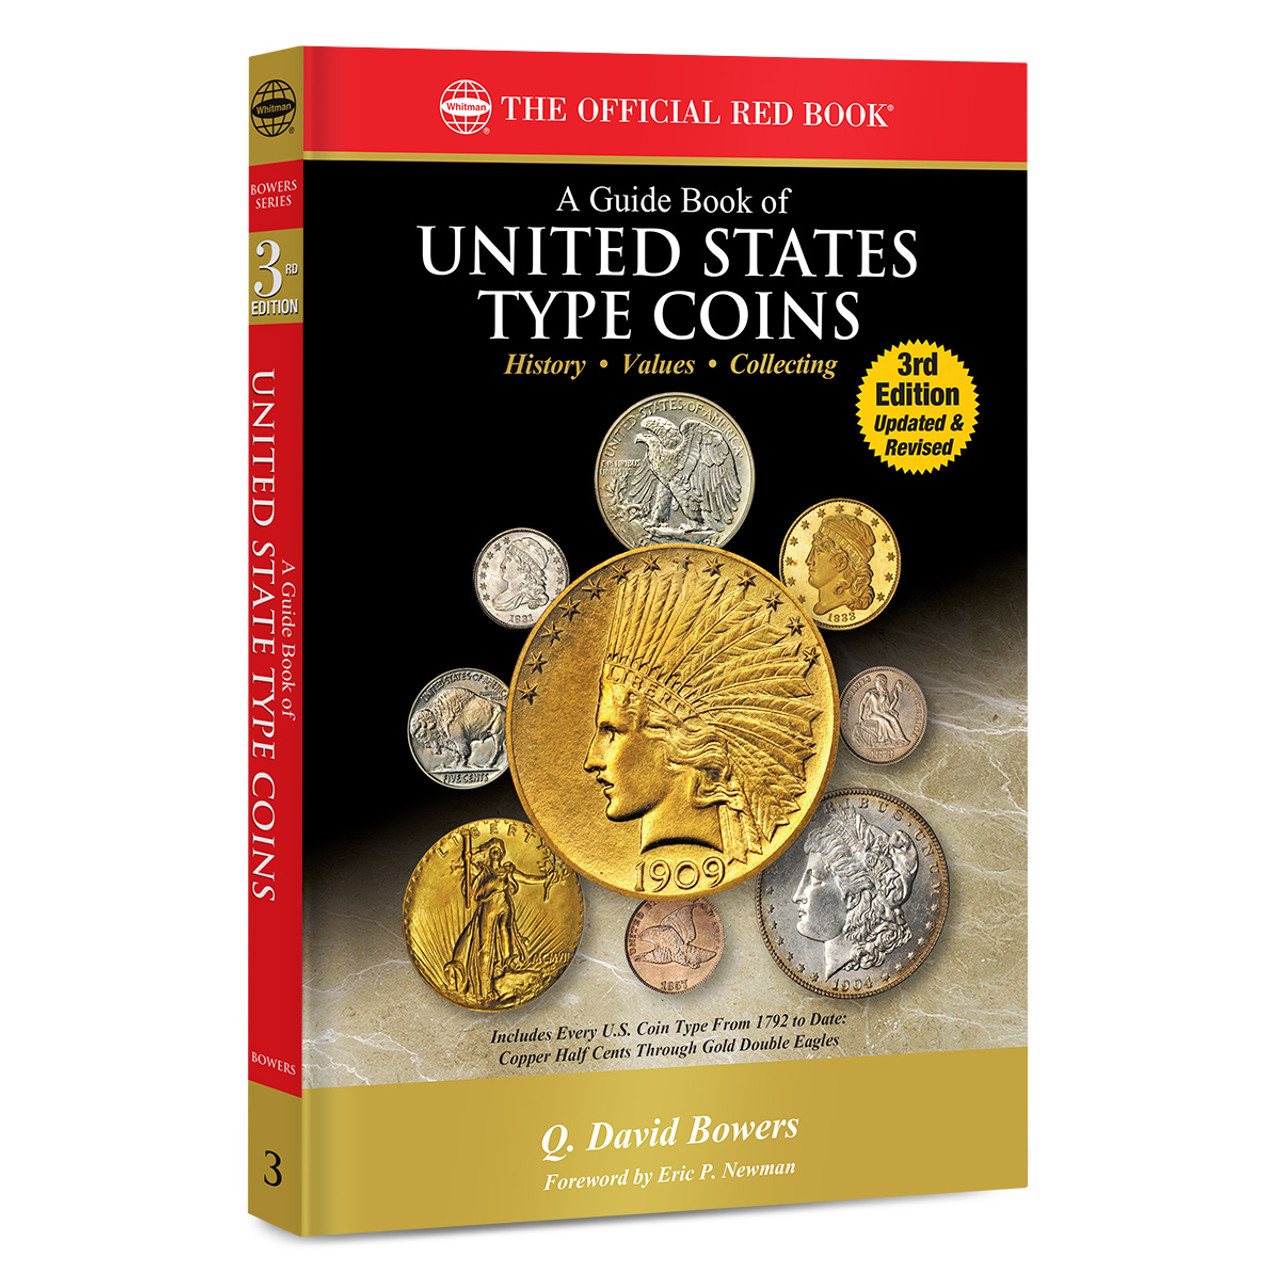 A Guide Book of United States Coins - Wikipedia